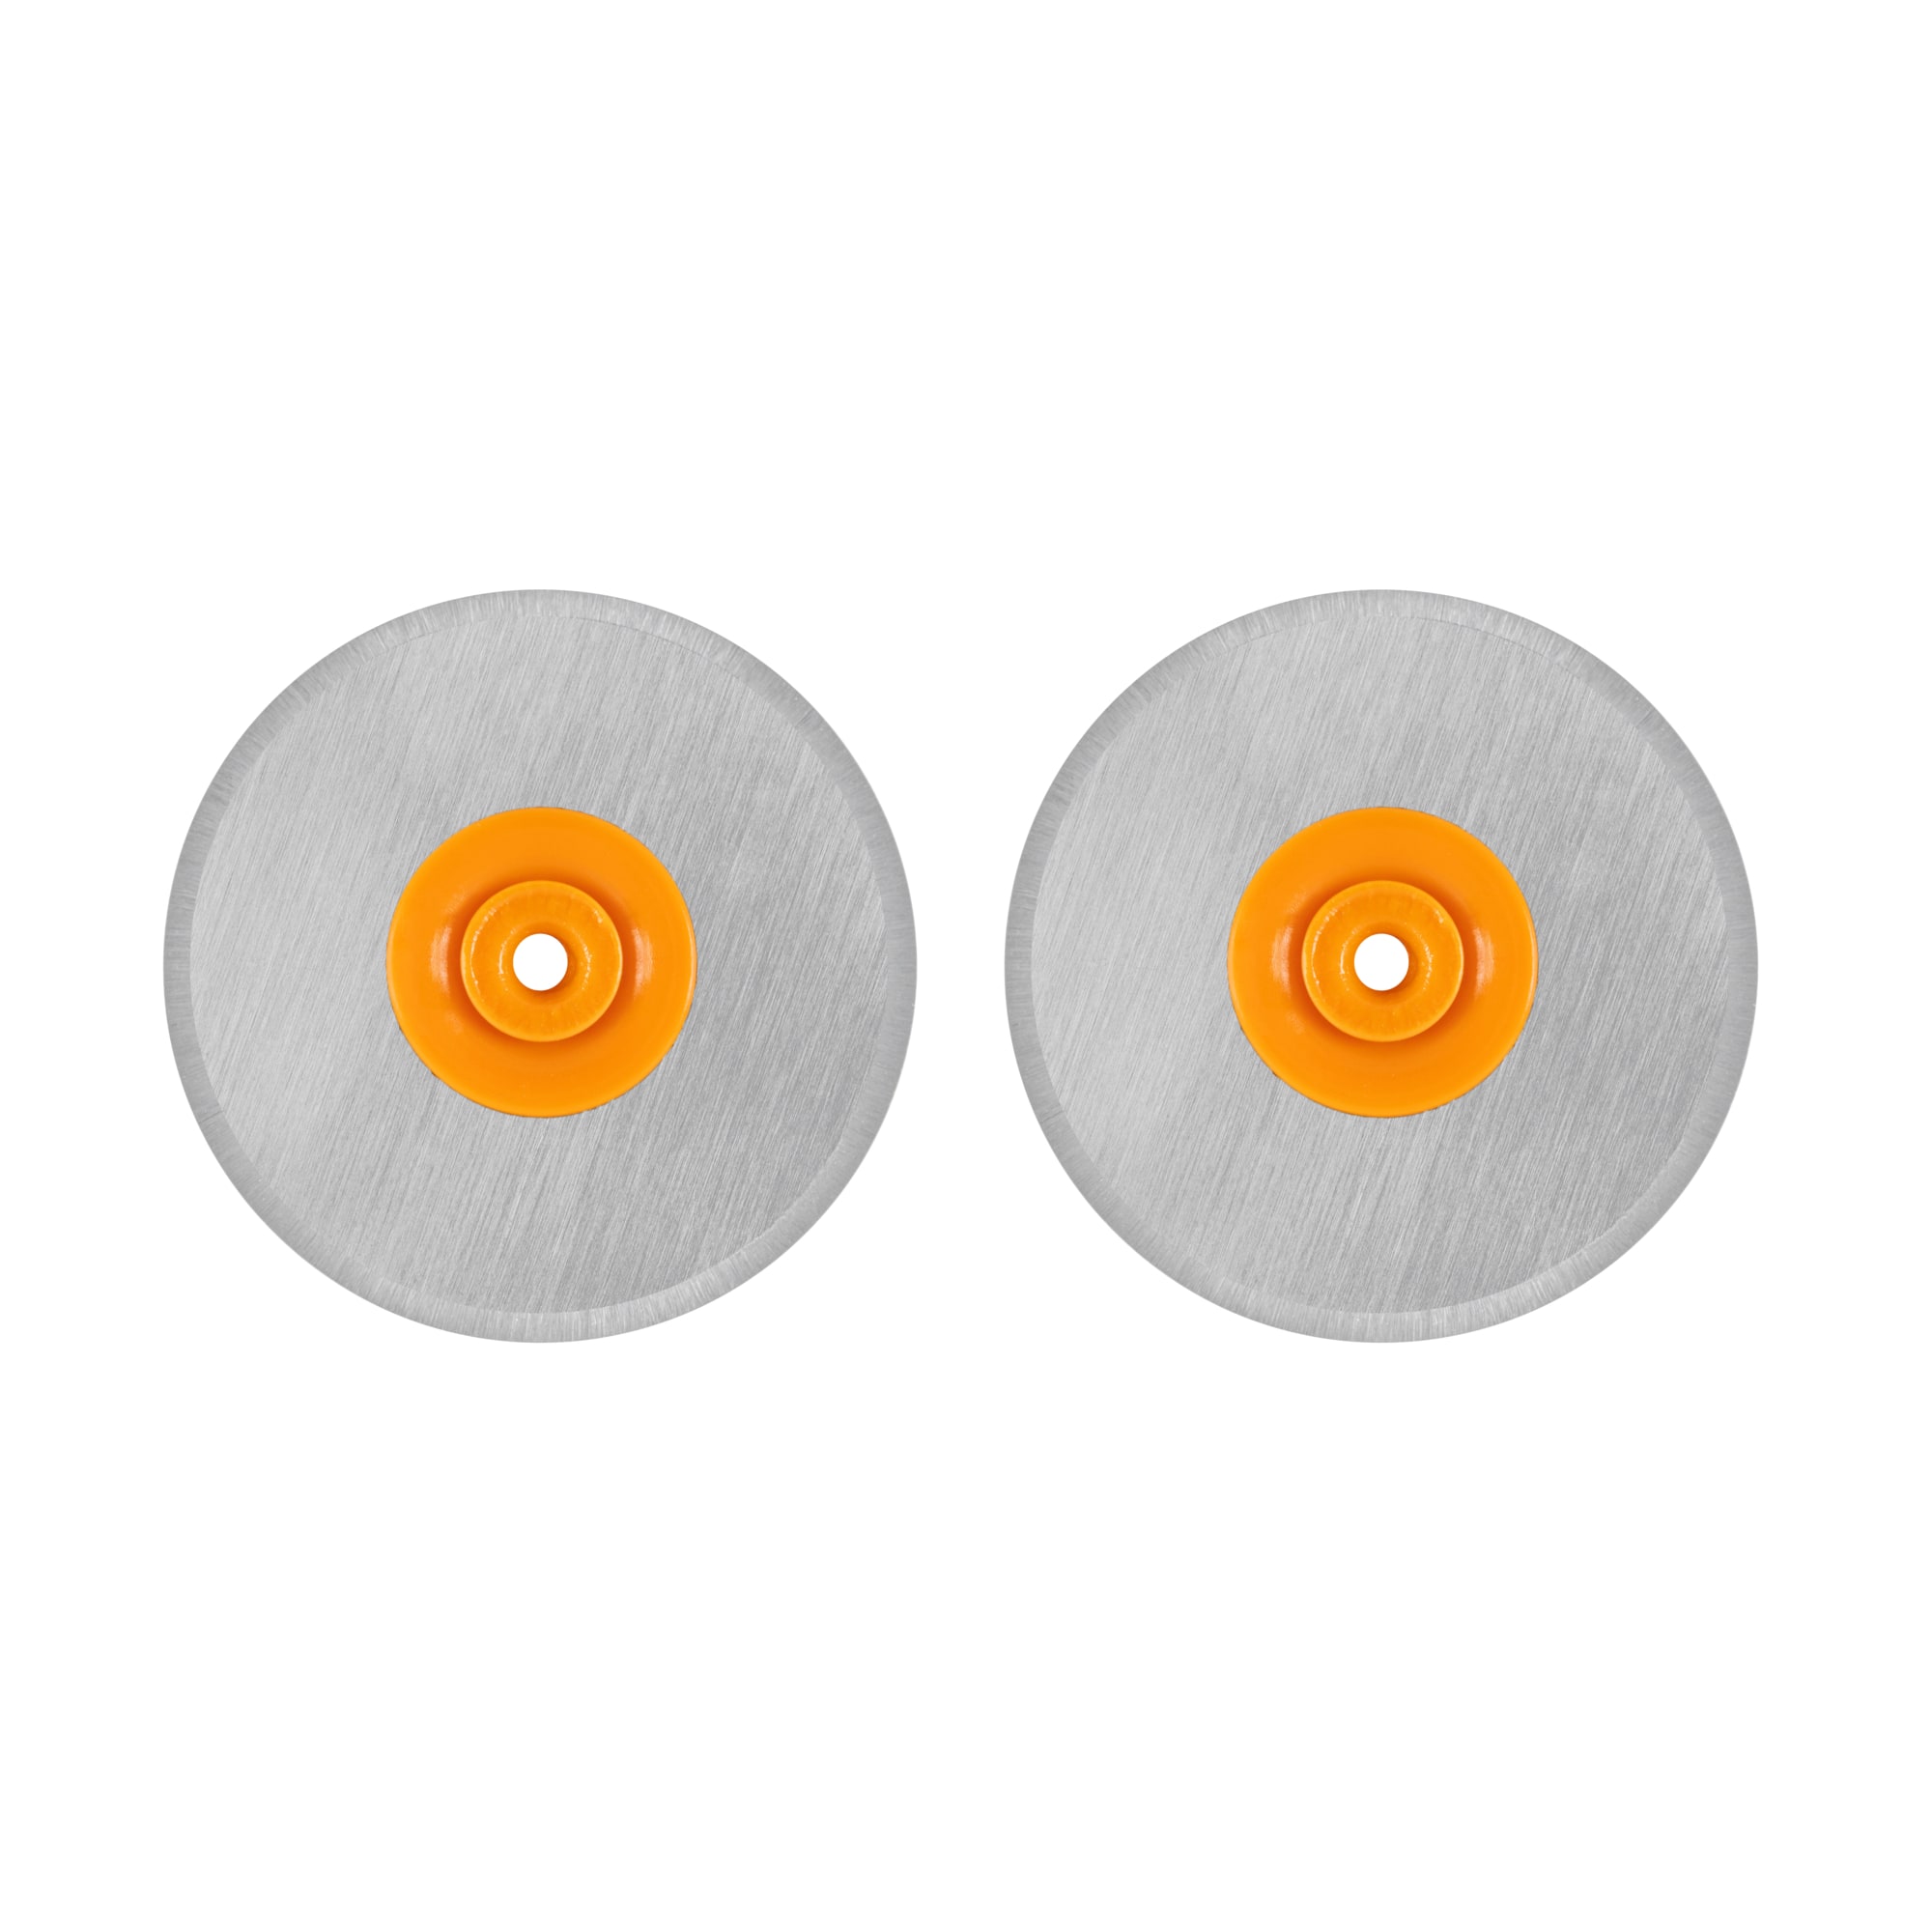 Fiskars Rotary Trimmer Replacement Blade F - 2/Pkg-28mm Straight. NEW